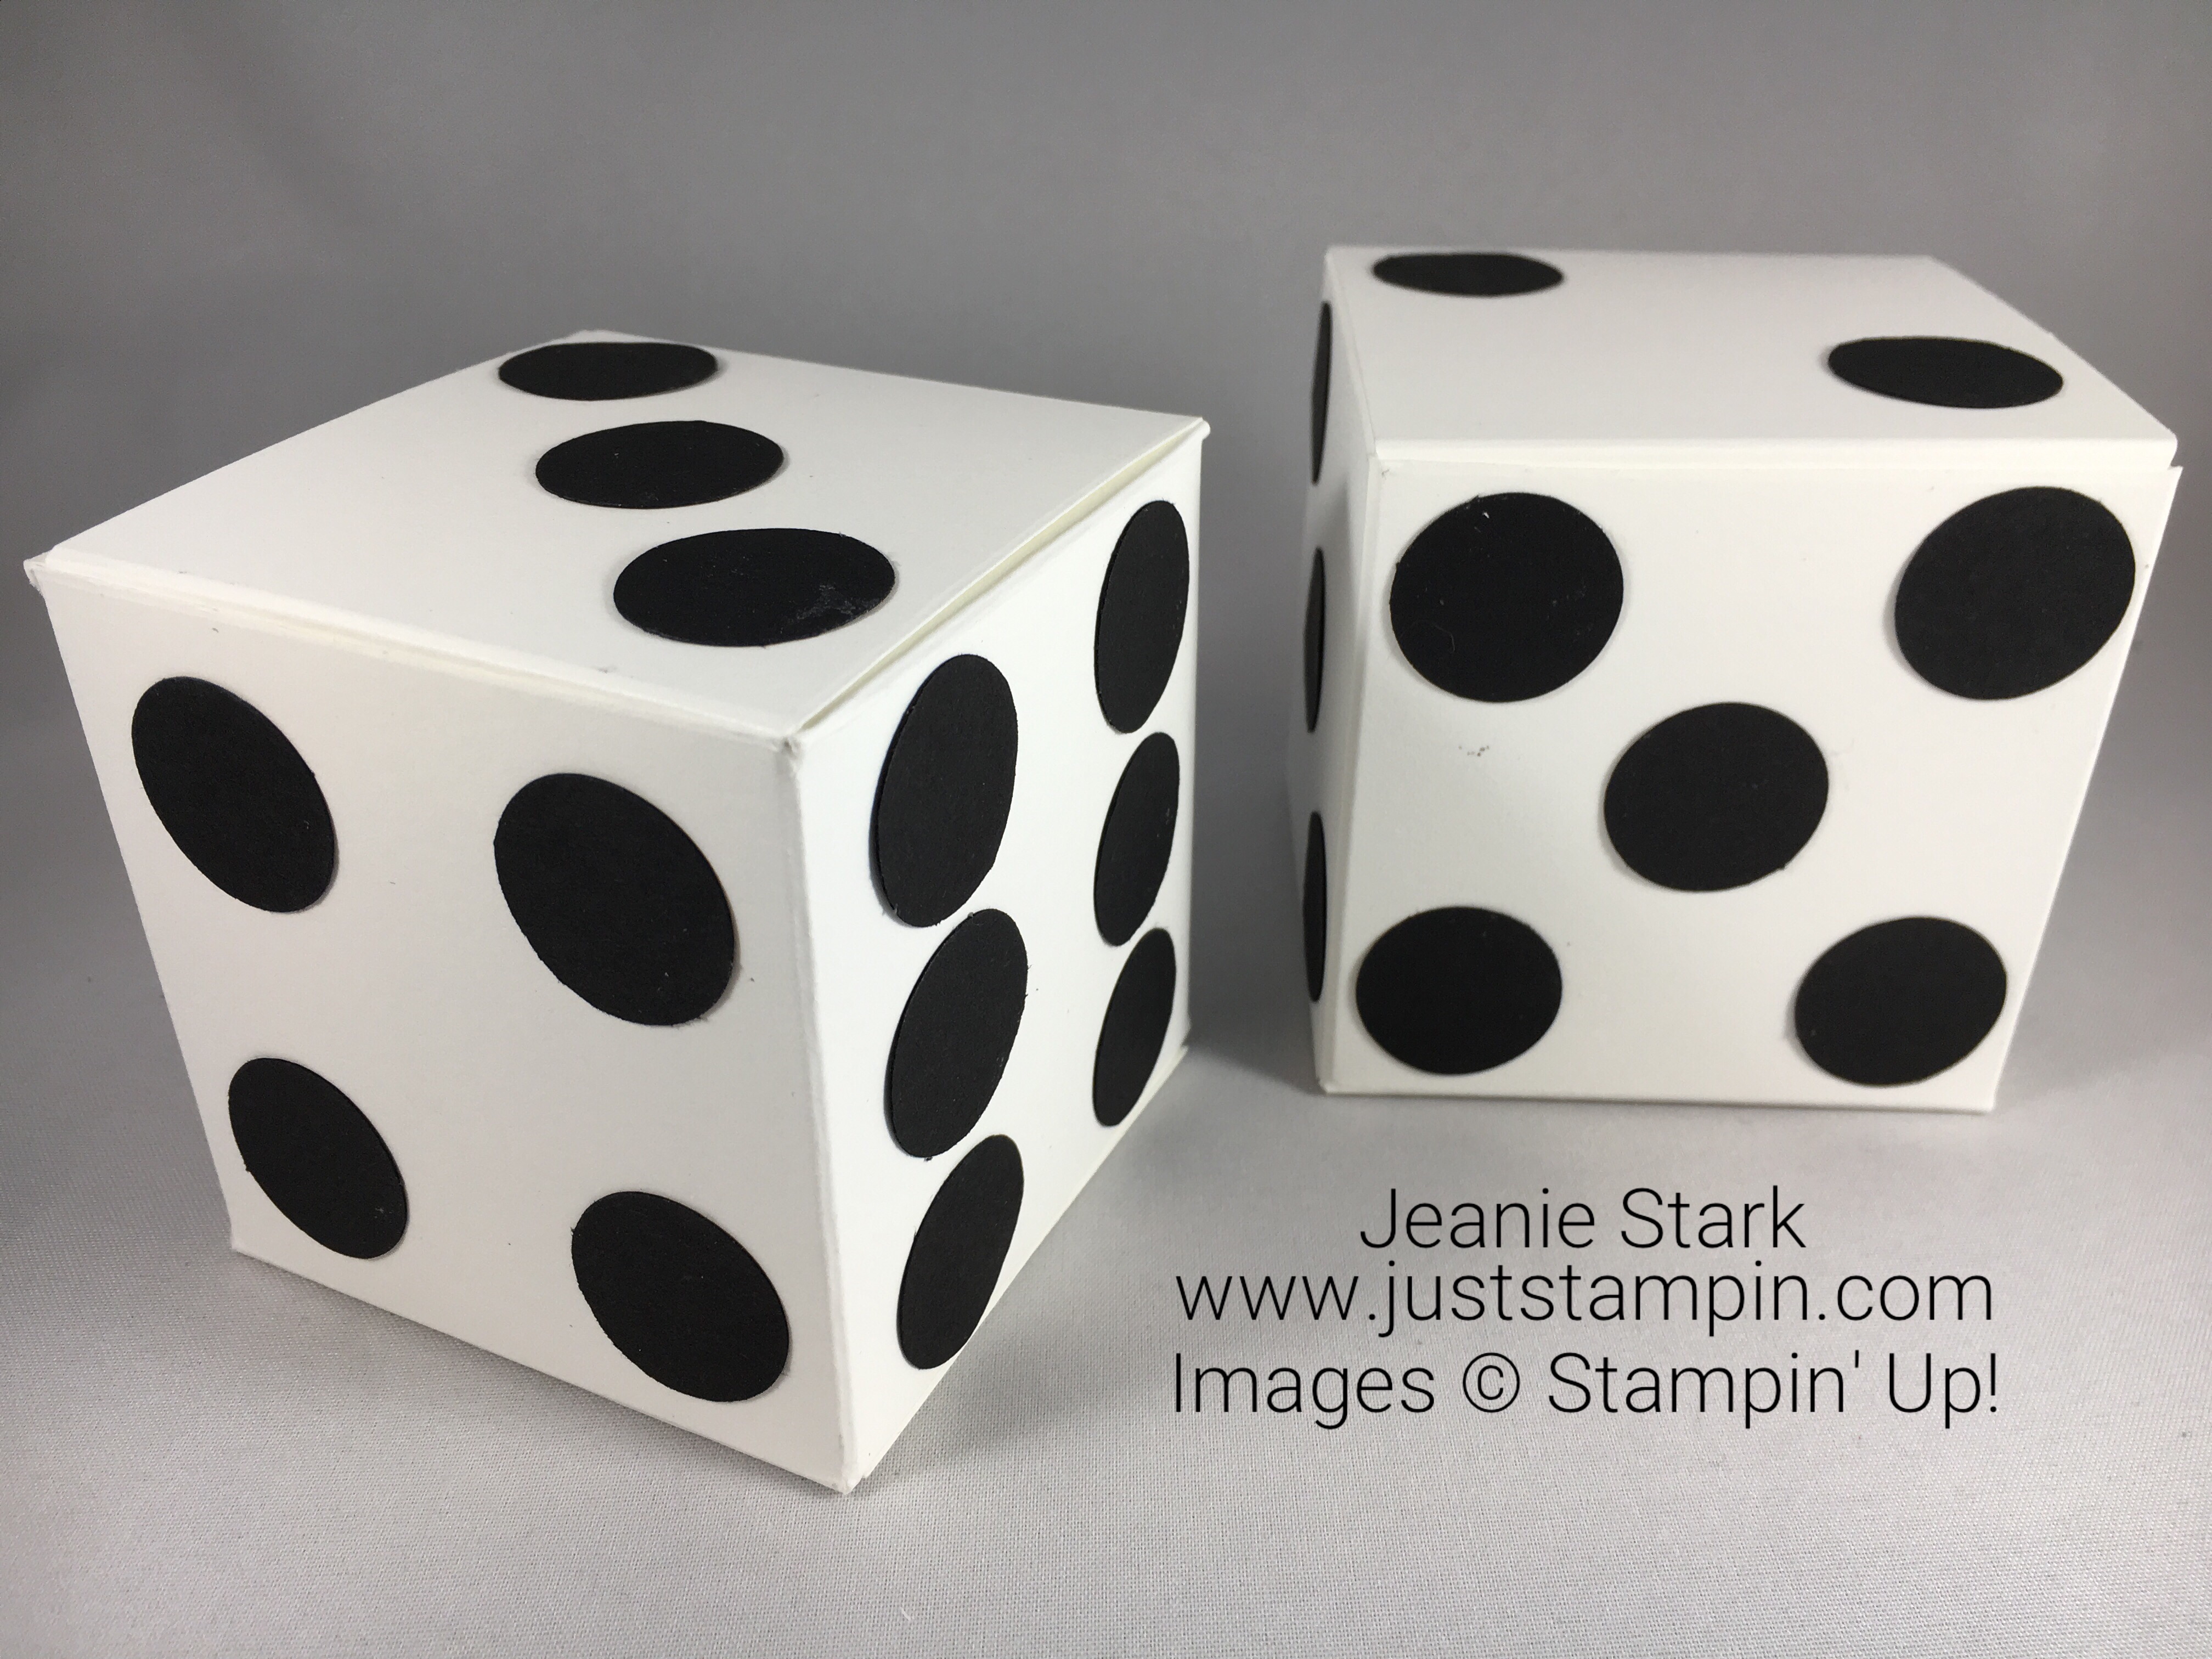 Stampin Up Simply Scored Cube Box idea - Jeanie Stark Stampin Up